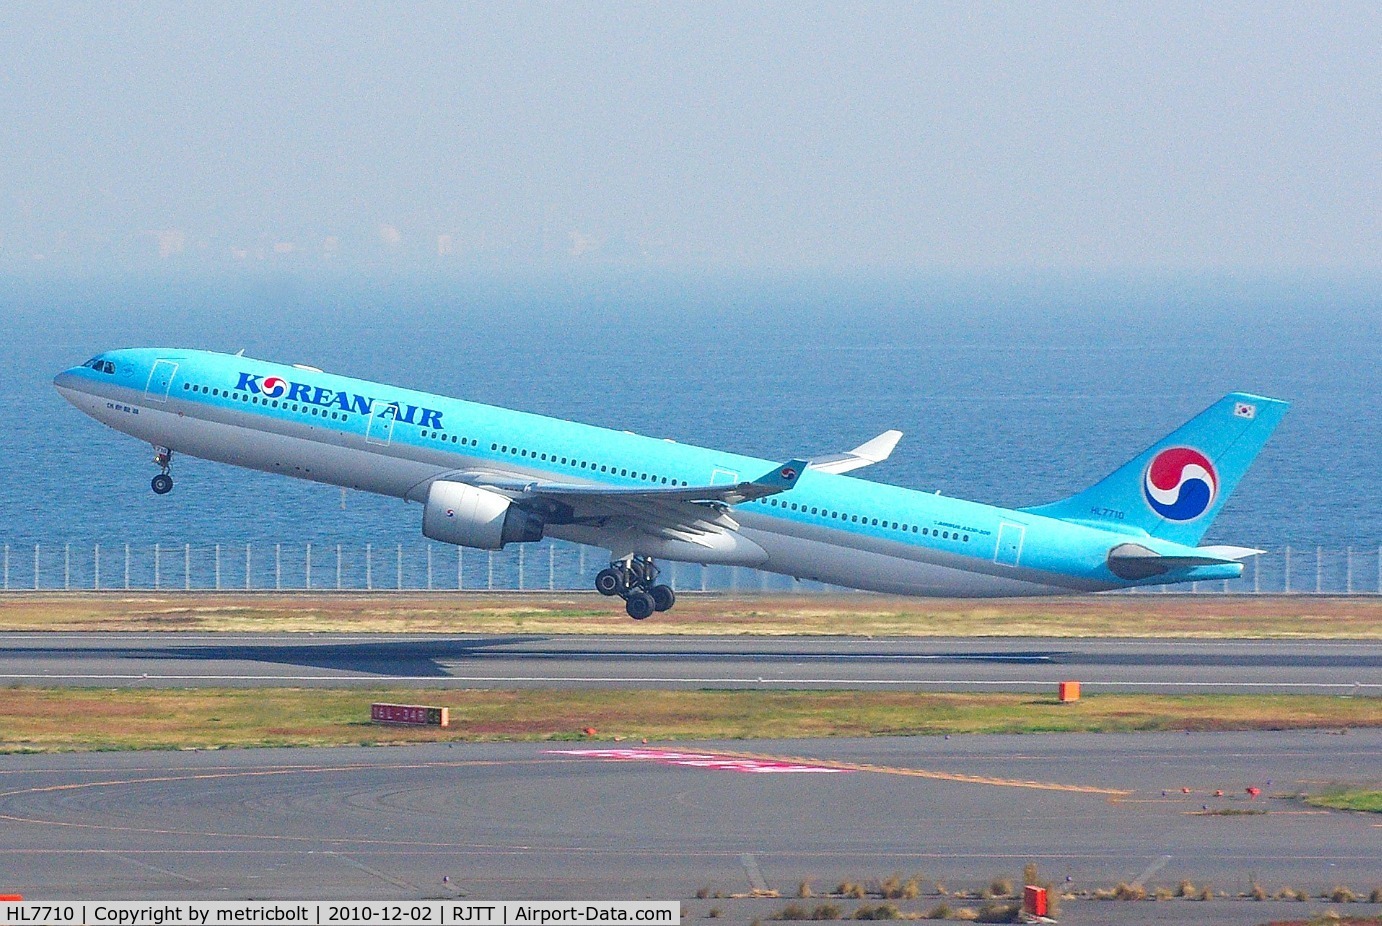 HL7710, 2002 Airbus A330-323X C/N 490, take off from Tokyo Haneda